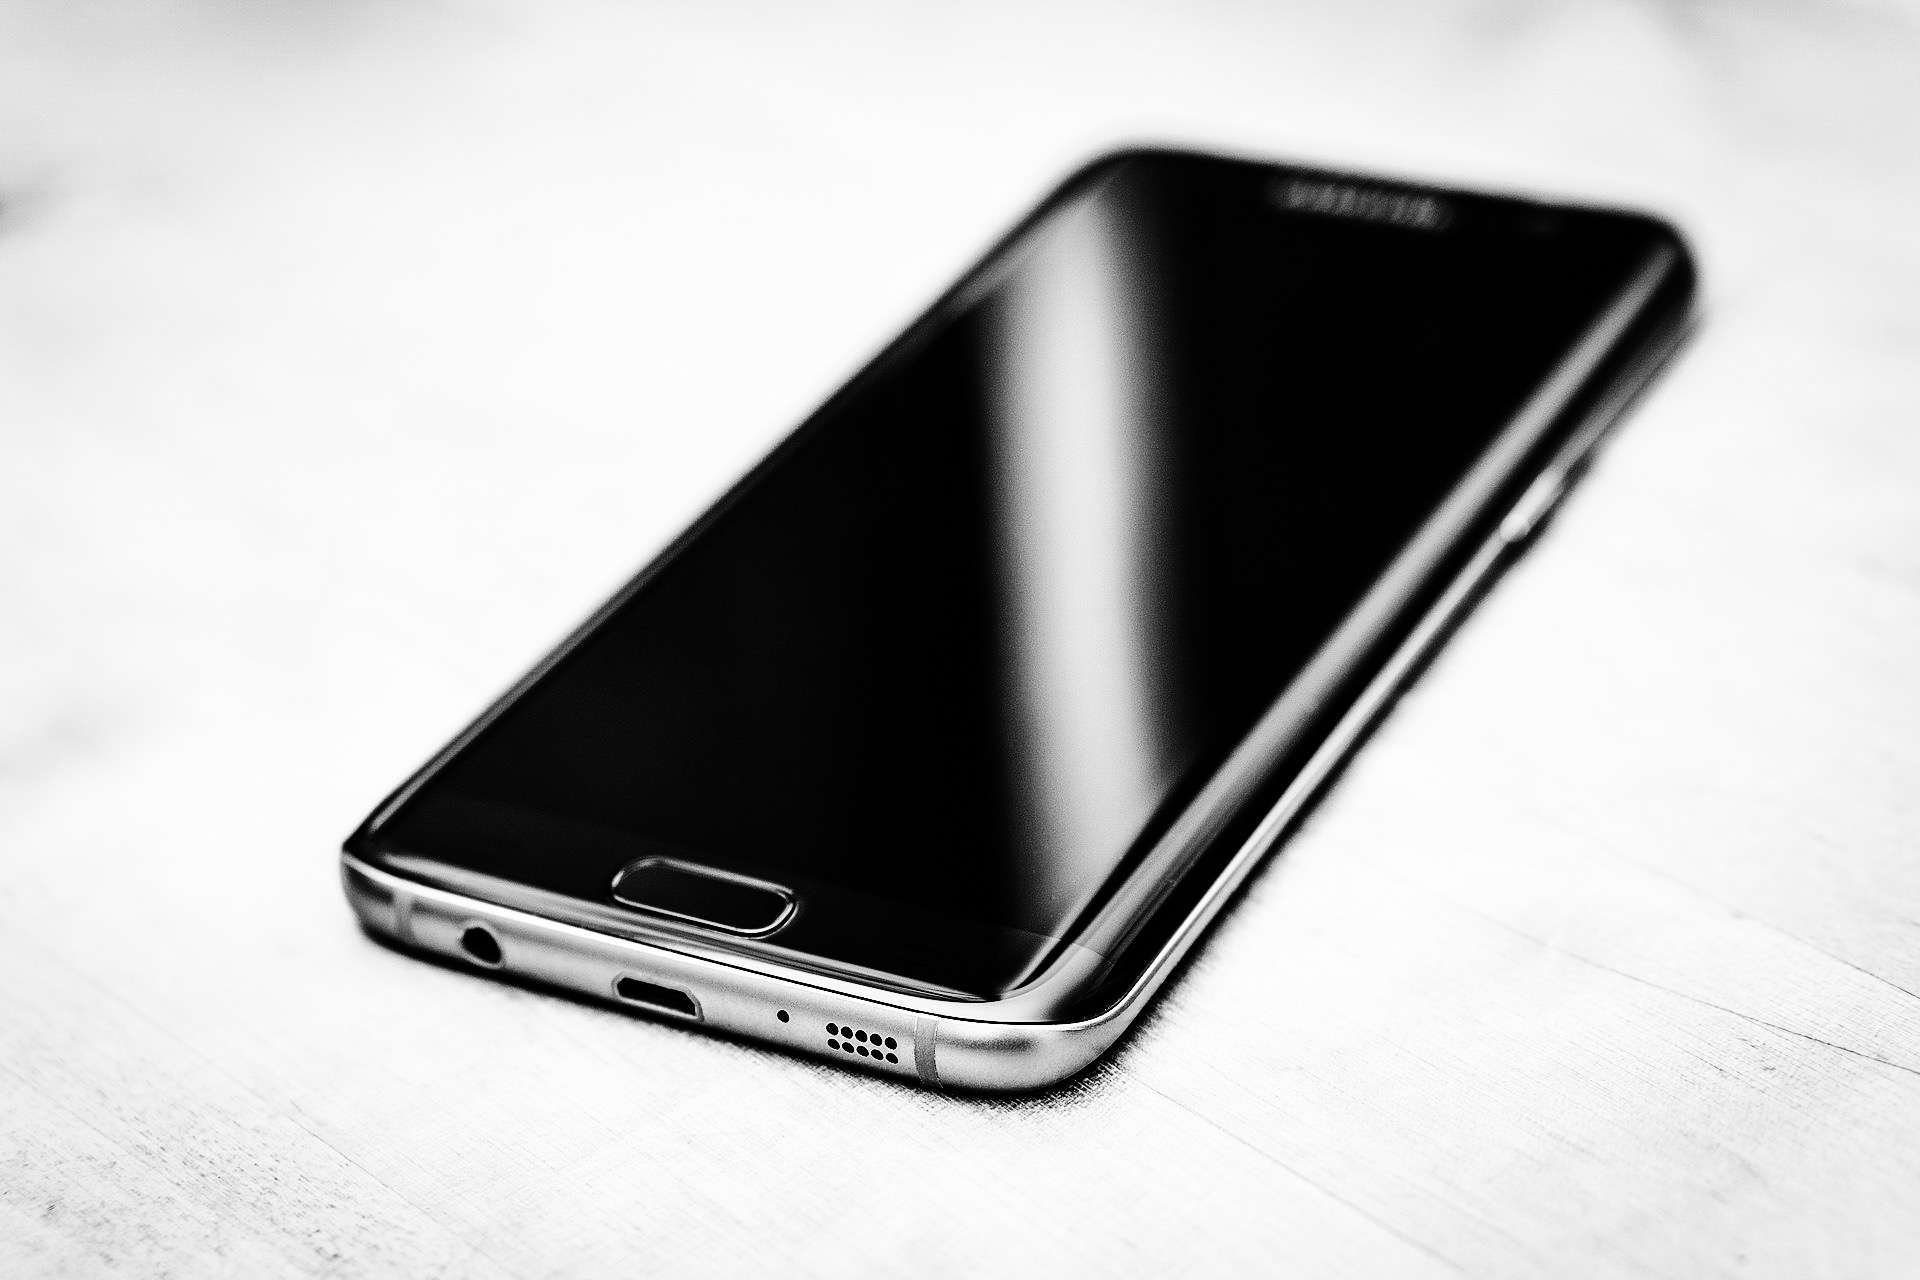 Pearl Black Samsung Galaxy S7 Edge To Launch On December 9